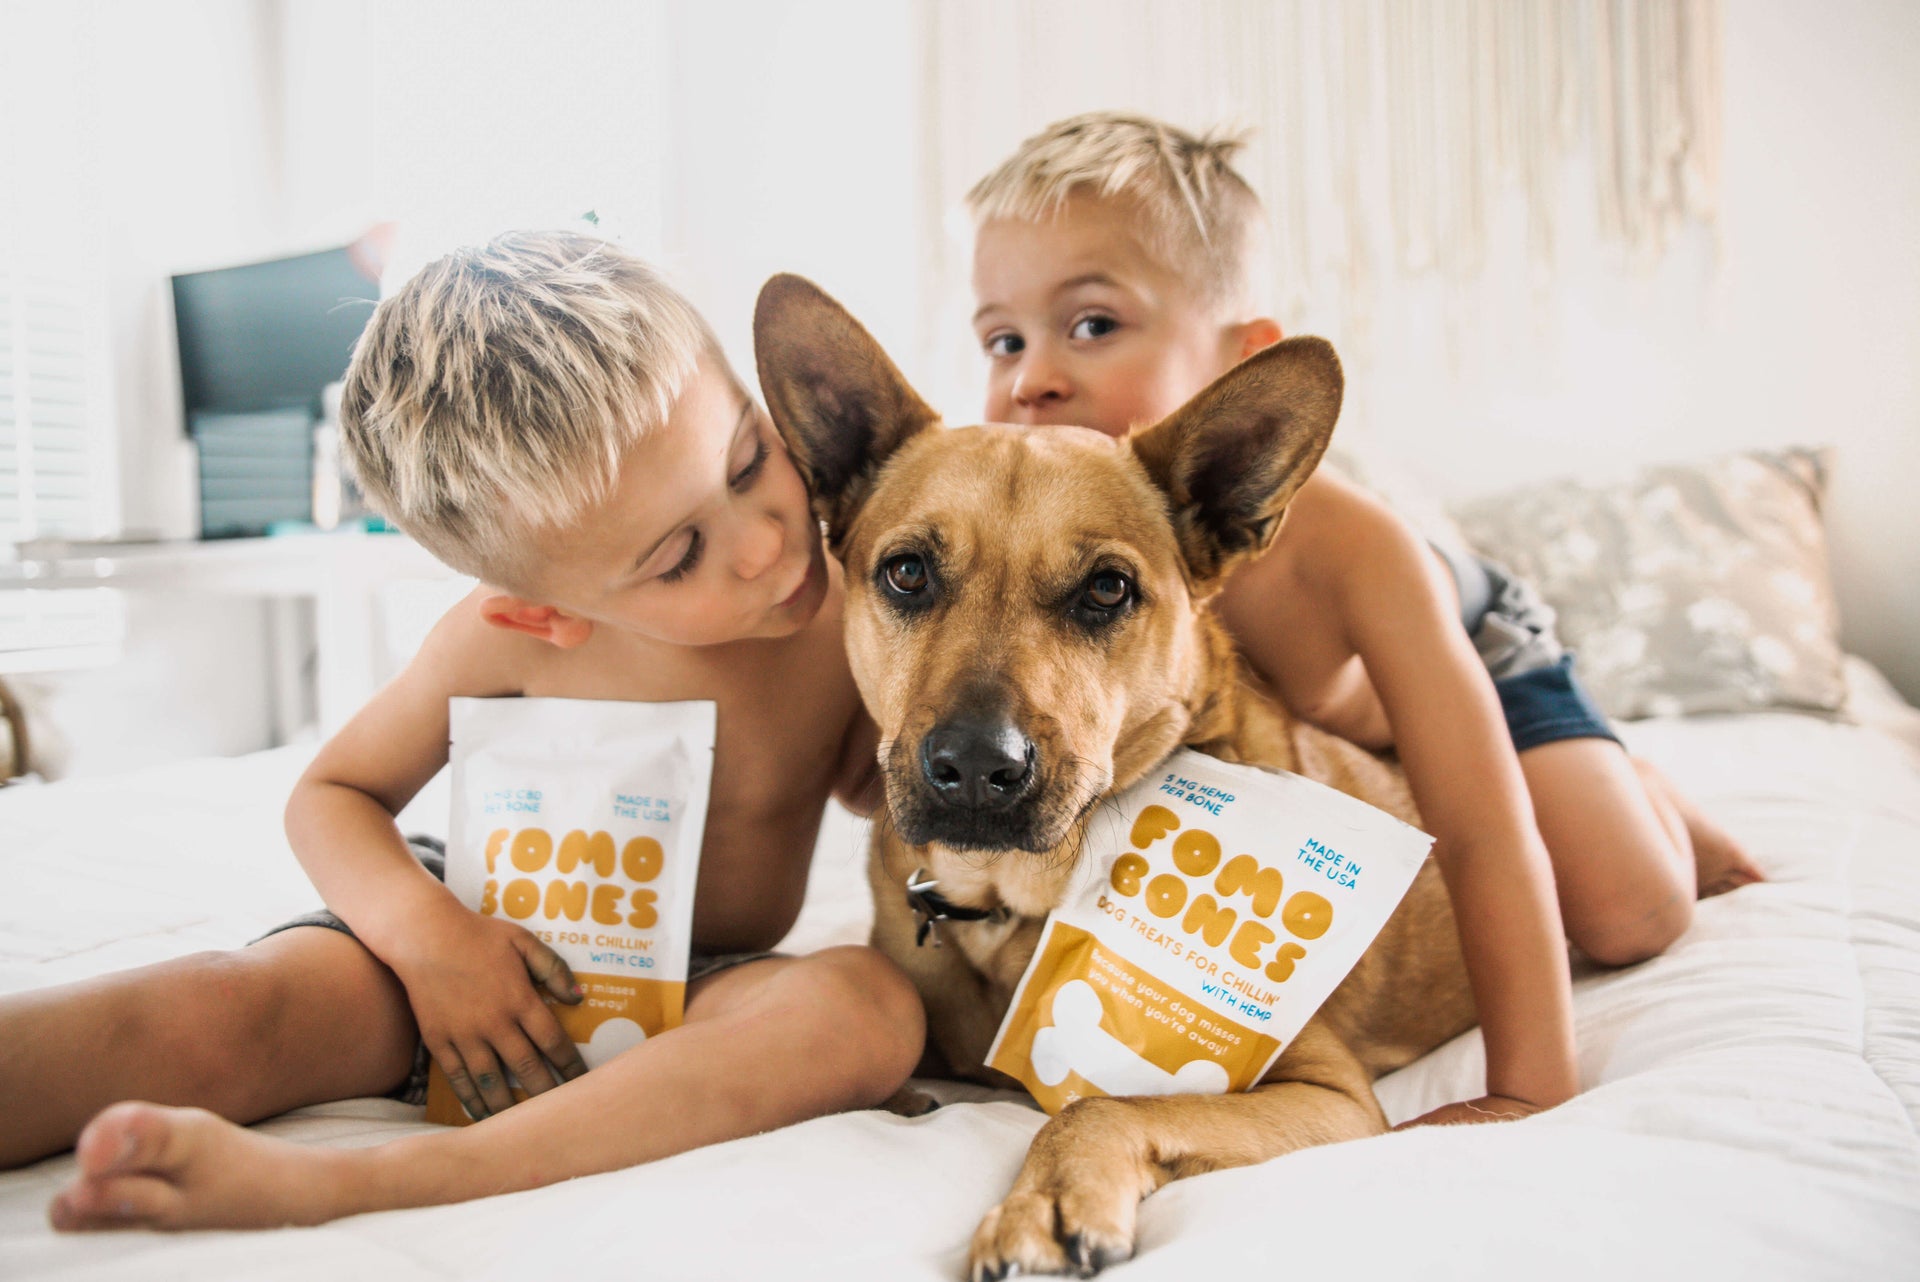 Sunday Scaries FOMO Bones CBD dog treats are perfect for dogs that get nervous around kids